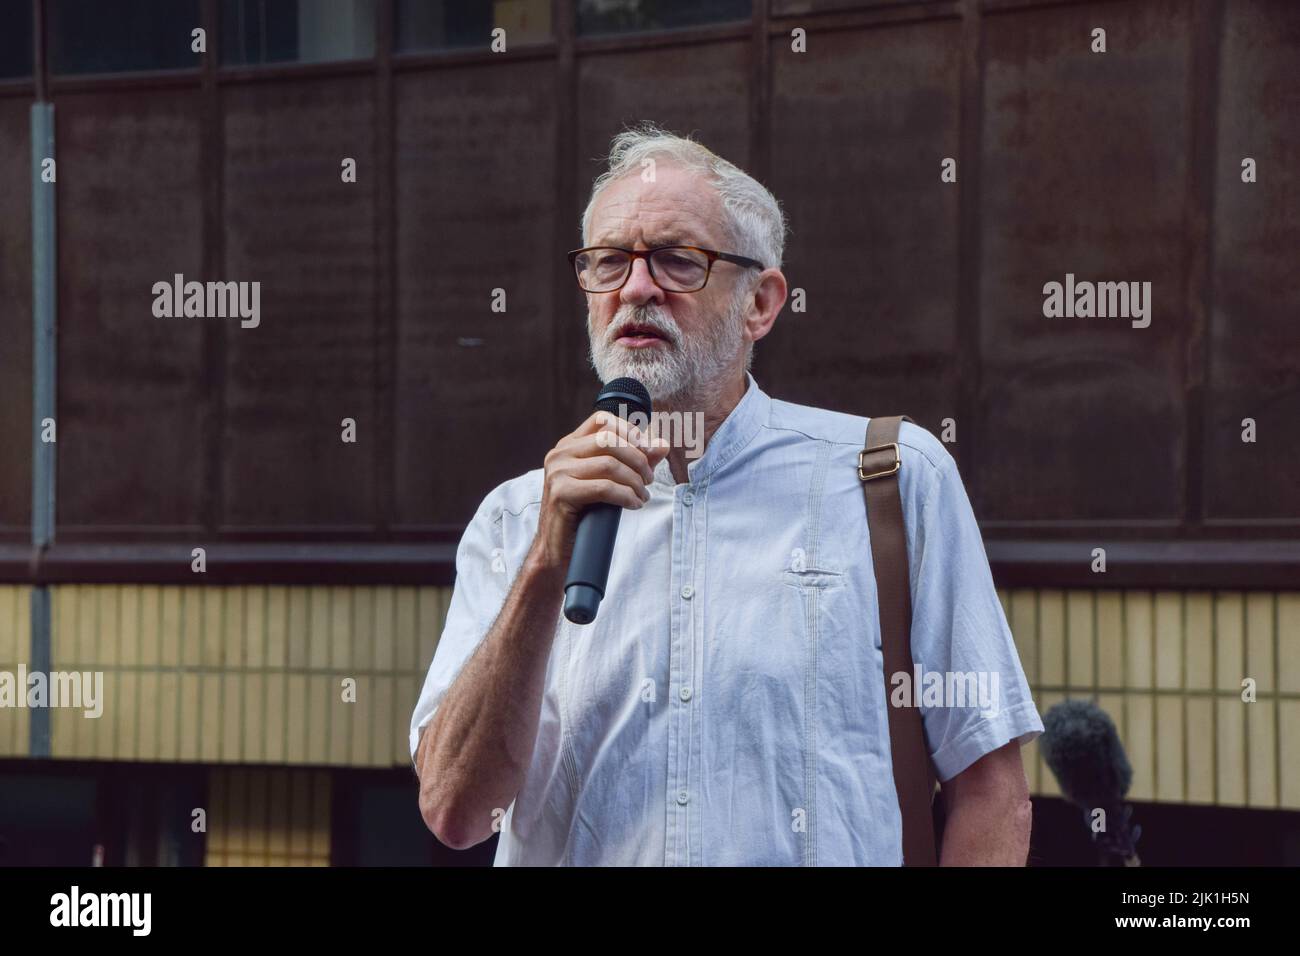 Labour MP Jeremy Corbyn speaks during the CWU (Communication Workers Union) strike outside BT Tower. Thousands of BT and Openreach workers have staged walkouts over pay. Stock Photo